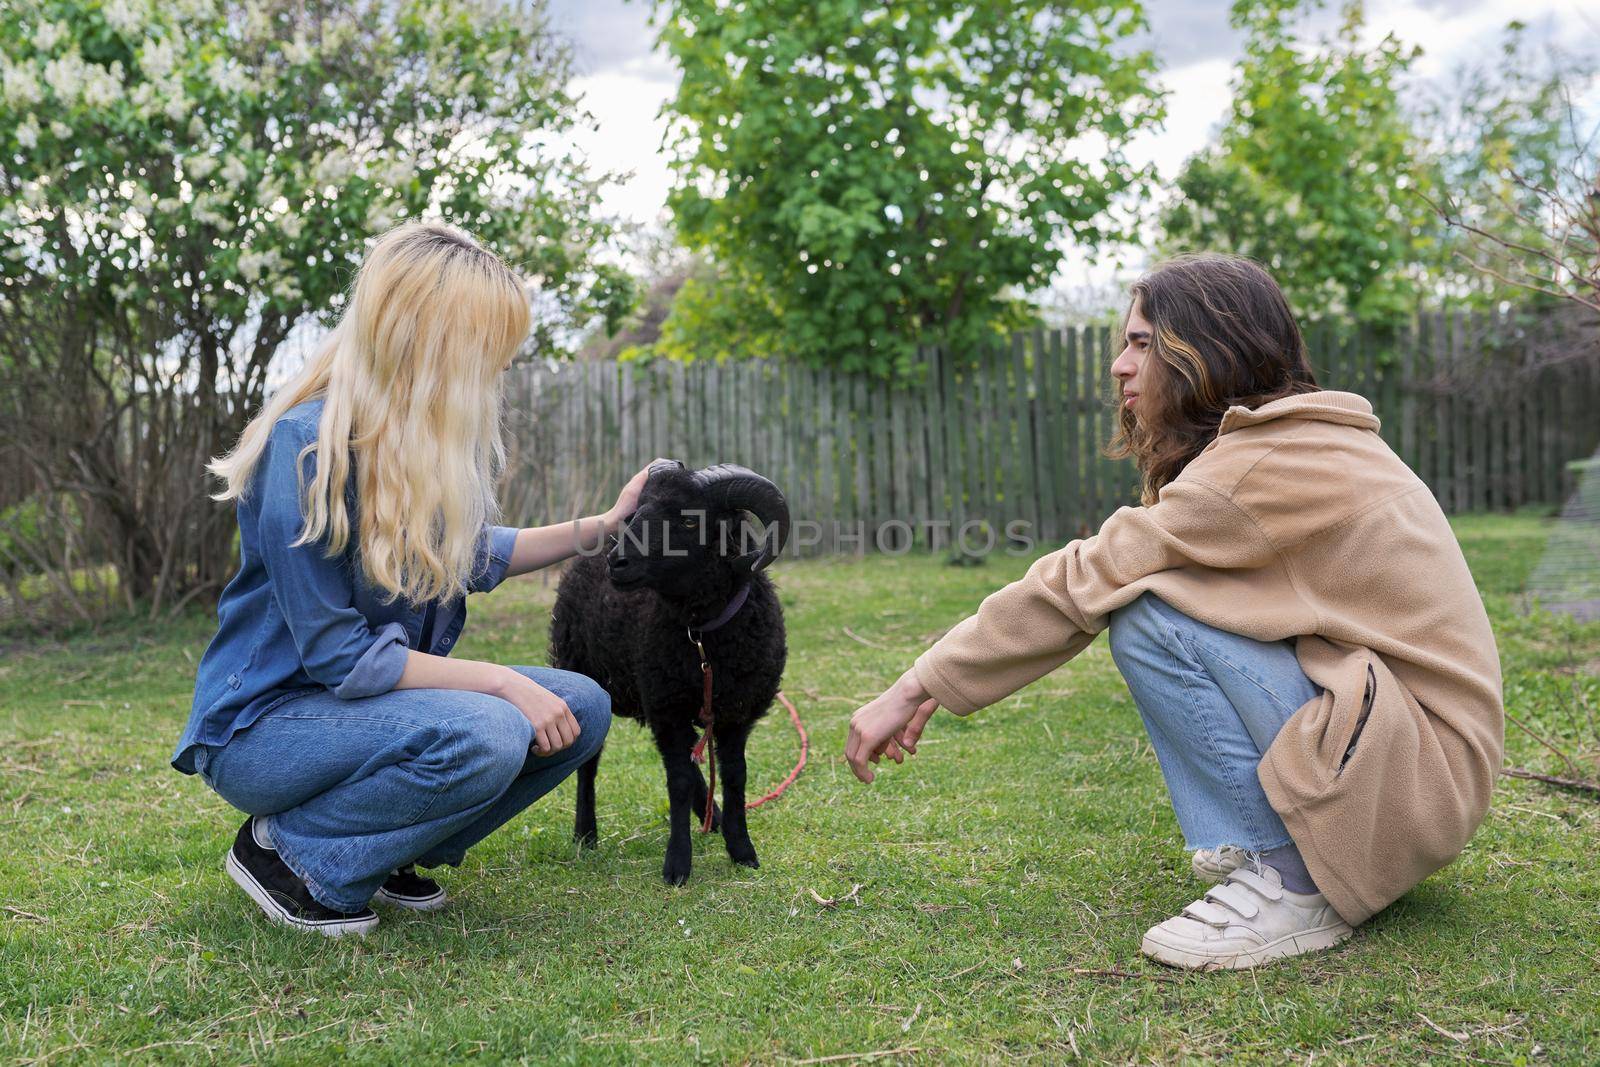 Rustic style, small animal farm, a couple of teenagers play touching a black ram by VH-studio